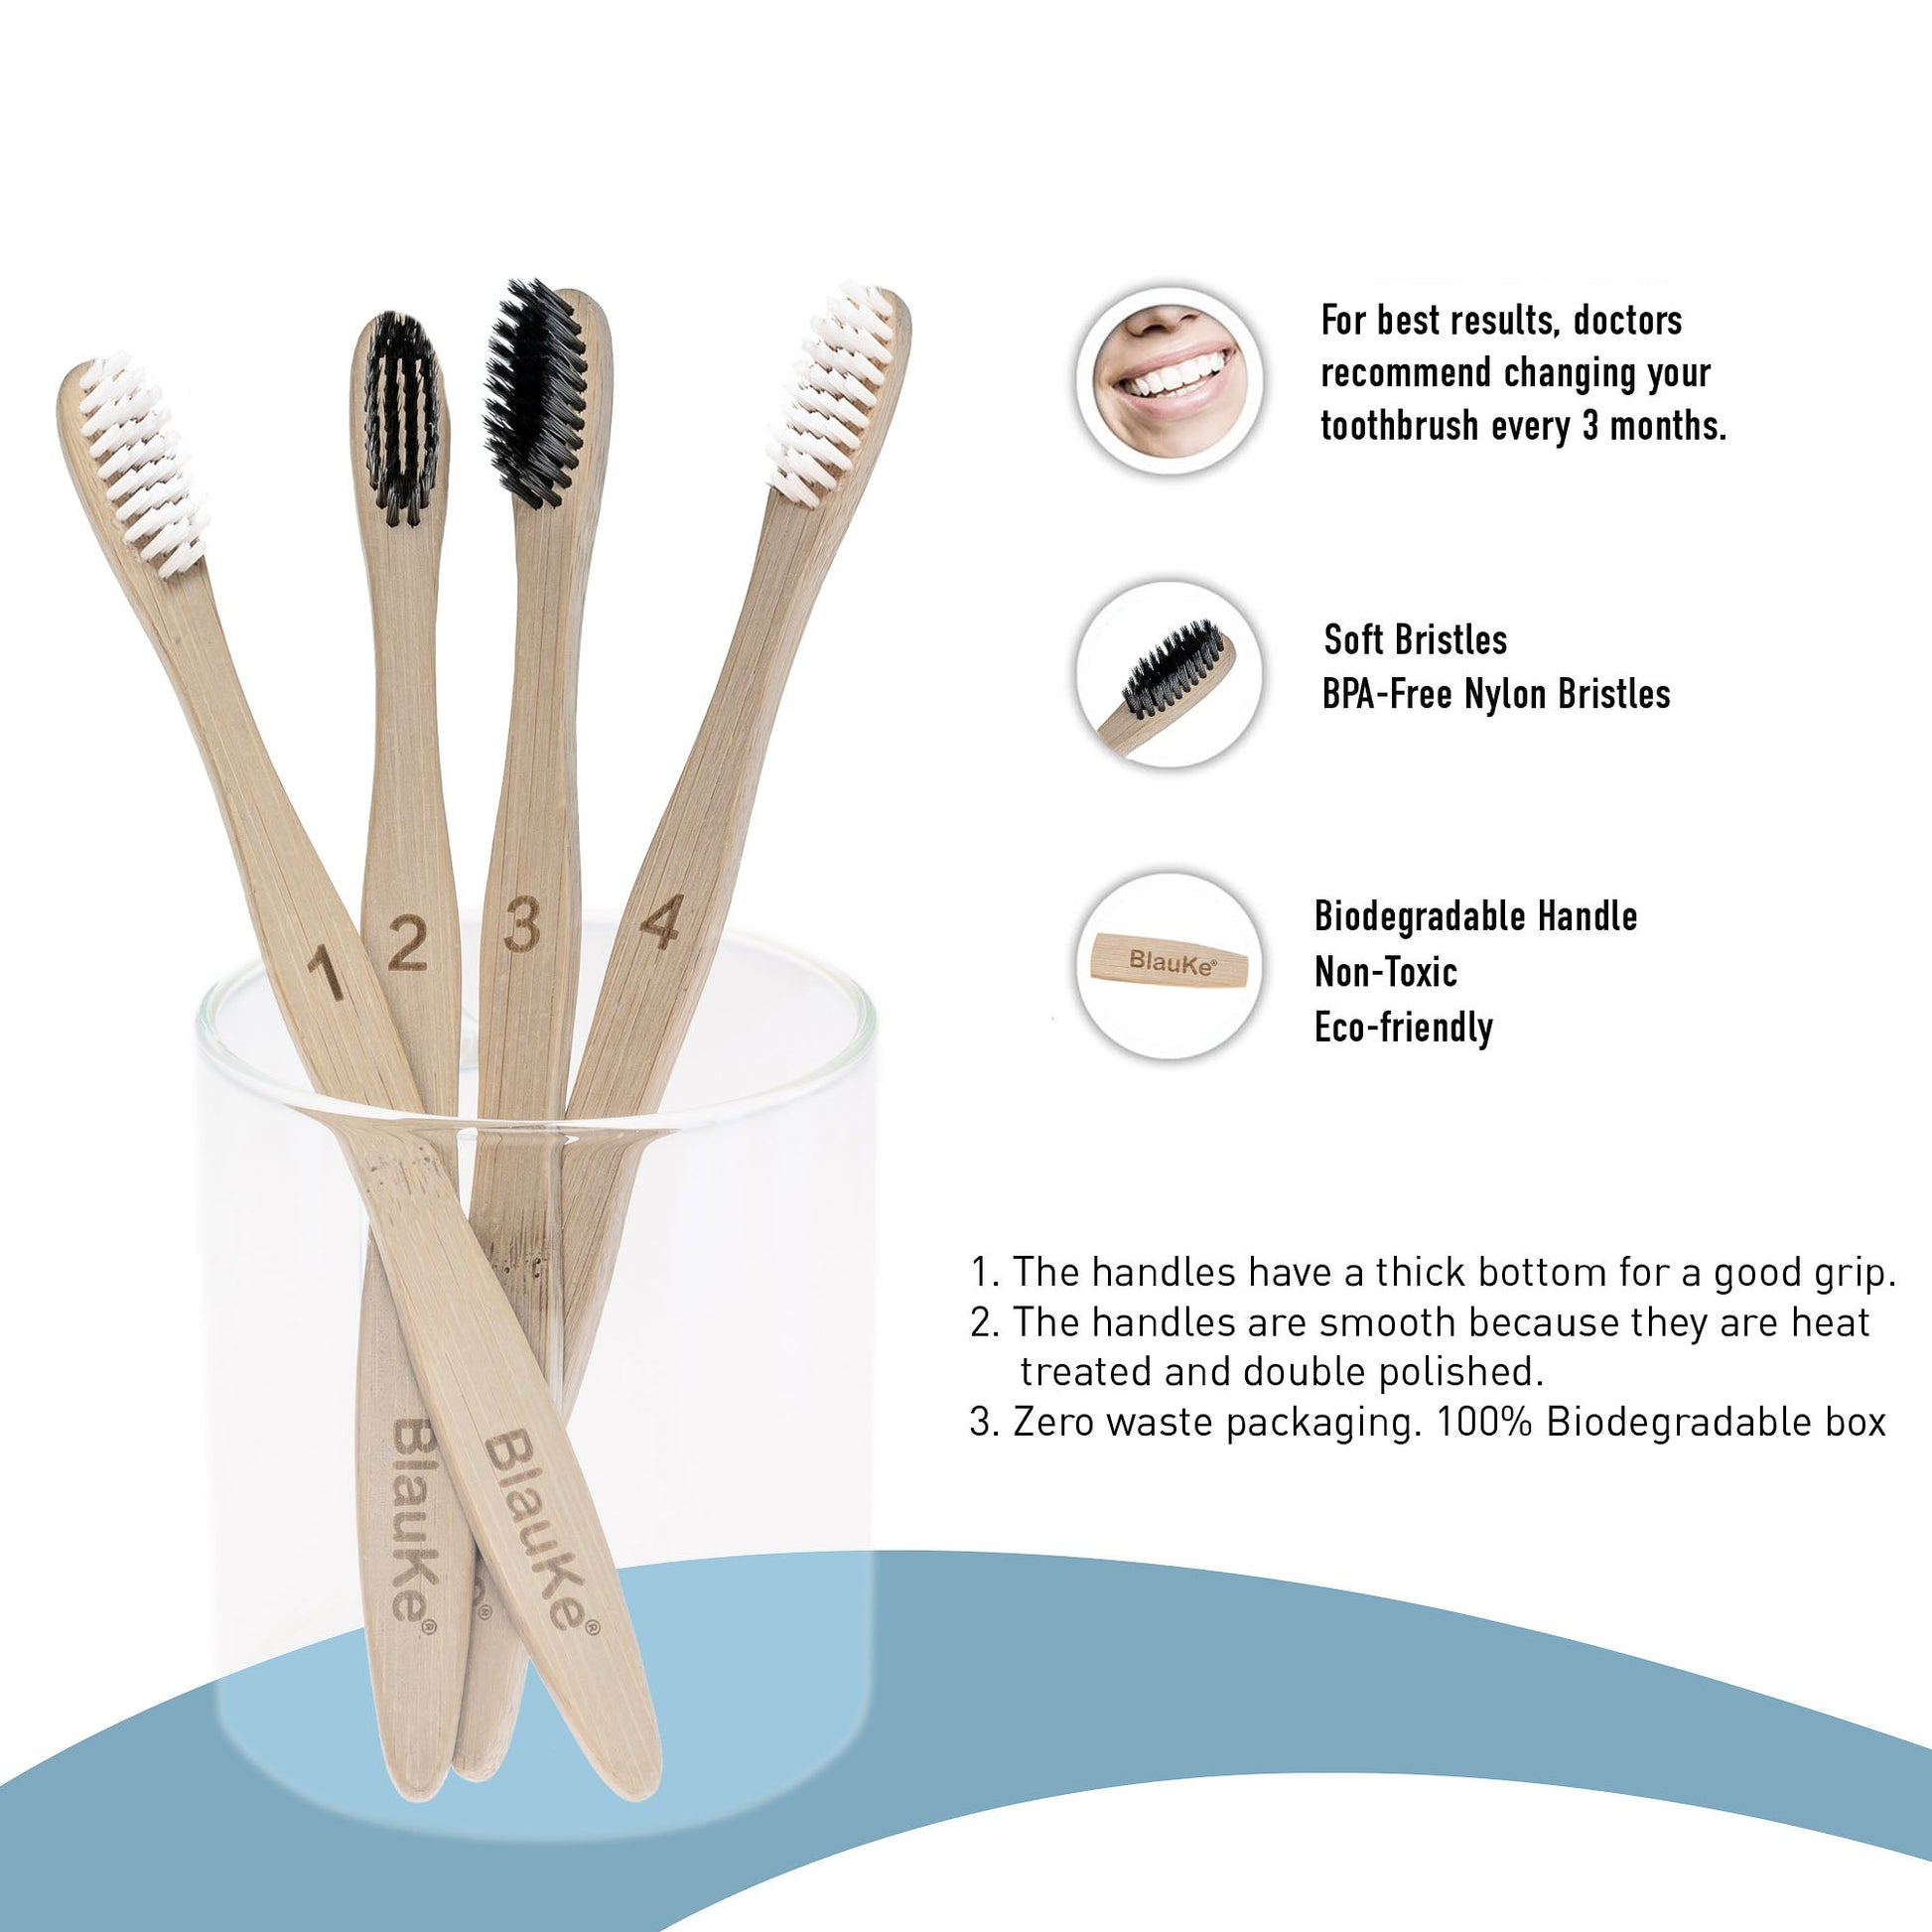 Bamboo Toothbrush Set 4-Pack - Bamboo Toothbrushes with Soft Bristles for Adults - Eco-Friendly, Biodegradable, Natural Wooden Toothbrushes-5